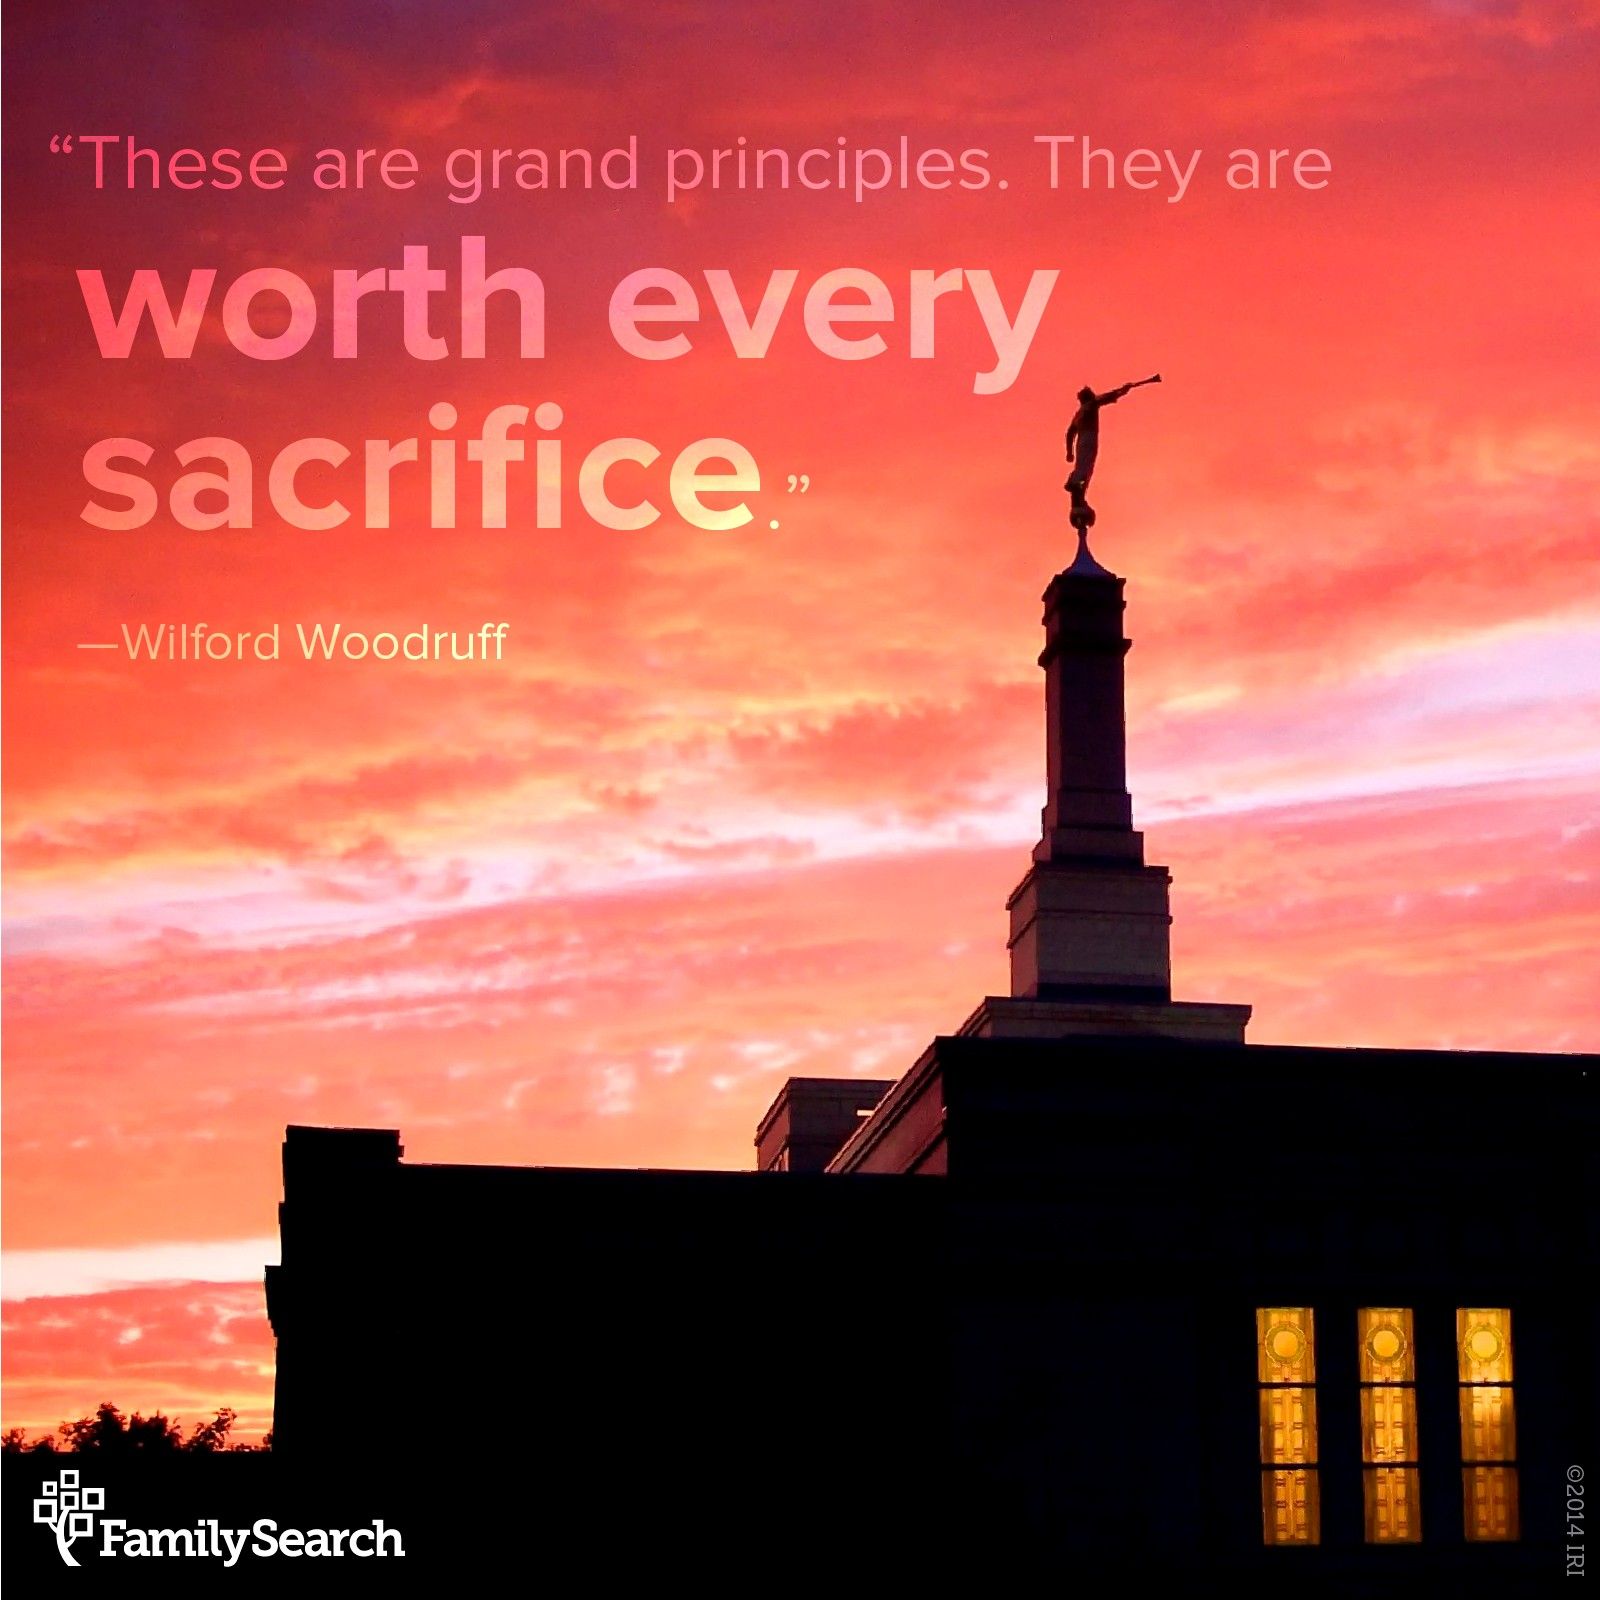 "“These are grand principles. They are worth every sacrifice.”—Wilford Woodruff In his talk “Roots and Branches,” Elder Quentin L. Cook quoted President Wilford Woodruff, who said: “There is hardly any principle the Lord has revealed that I have rejoiced more in than in the redemption of our dead; that we will have our fathers, our mothers, our wives and our children with us in the family organization, in the morning of the first resurrection and in the Celestial Kingdom. These are grand principles. They are worth every sacrifice.”"  